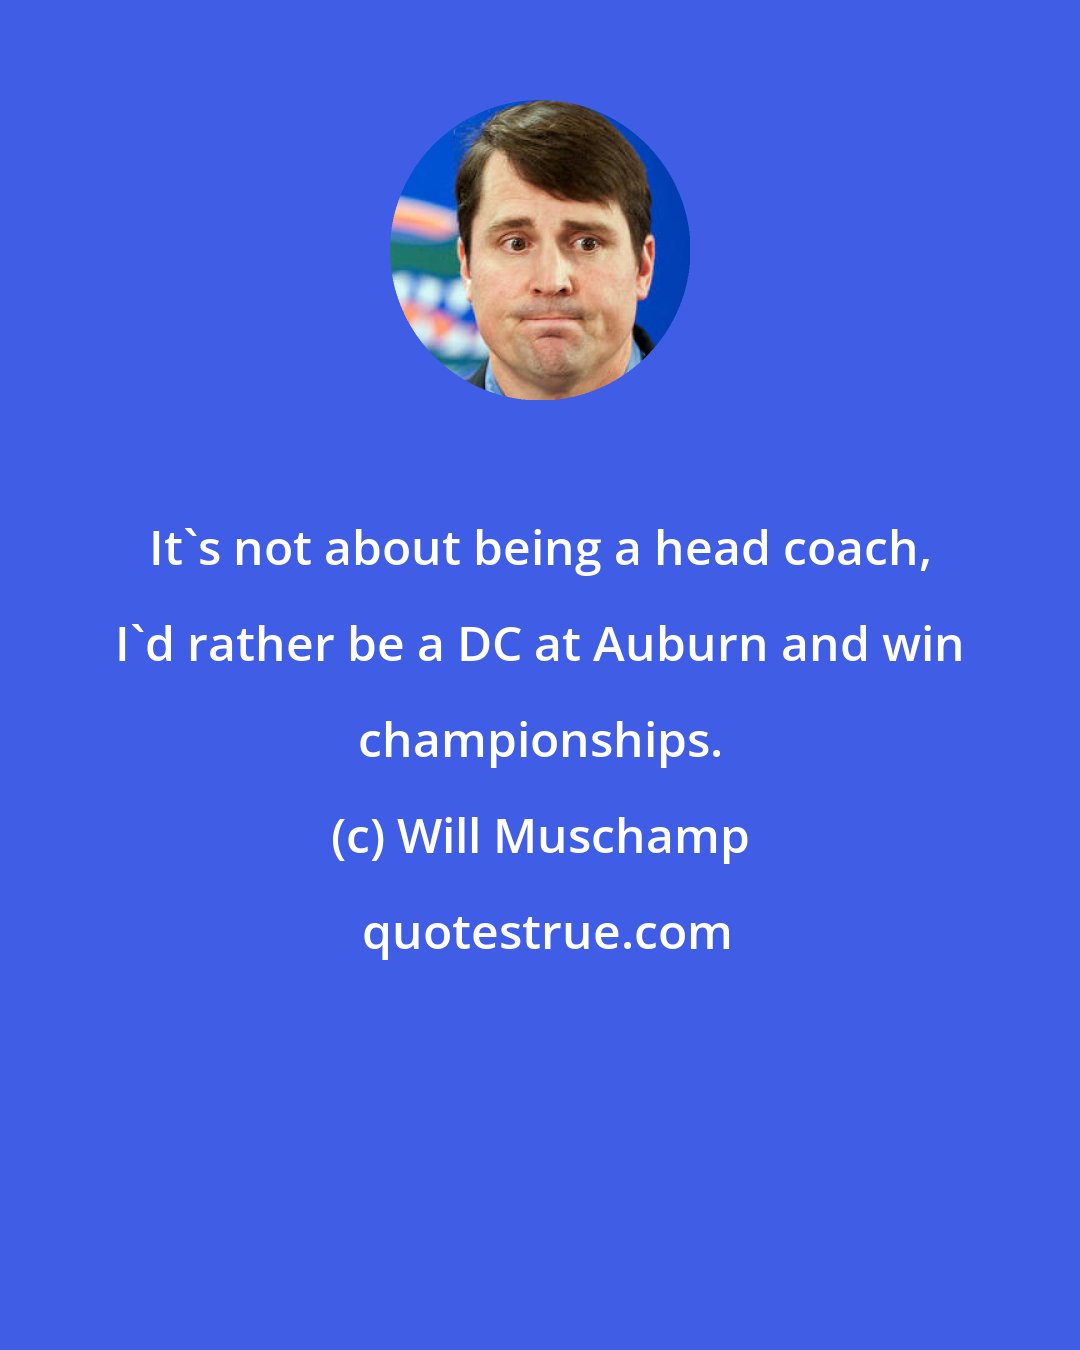 Will Muschamp: It's not about being a head coach, I'd rather be a DC at Auburn and win championships.